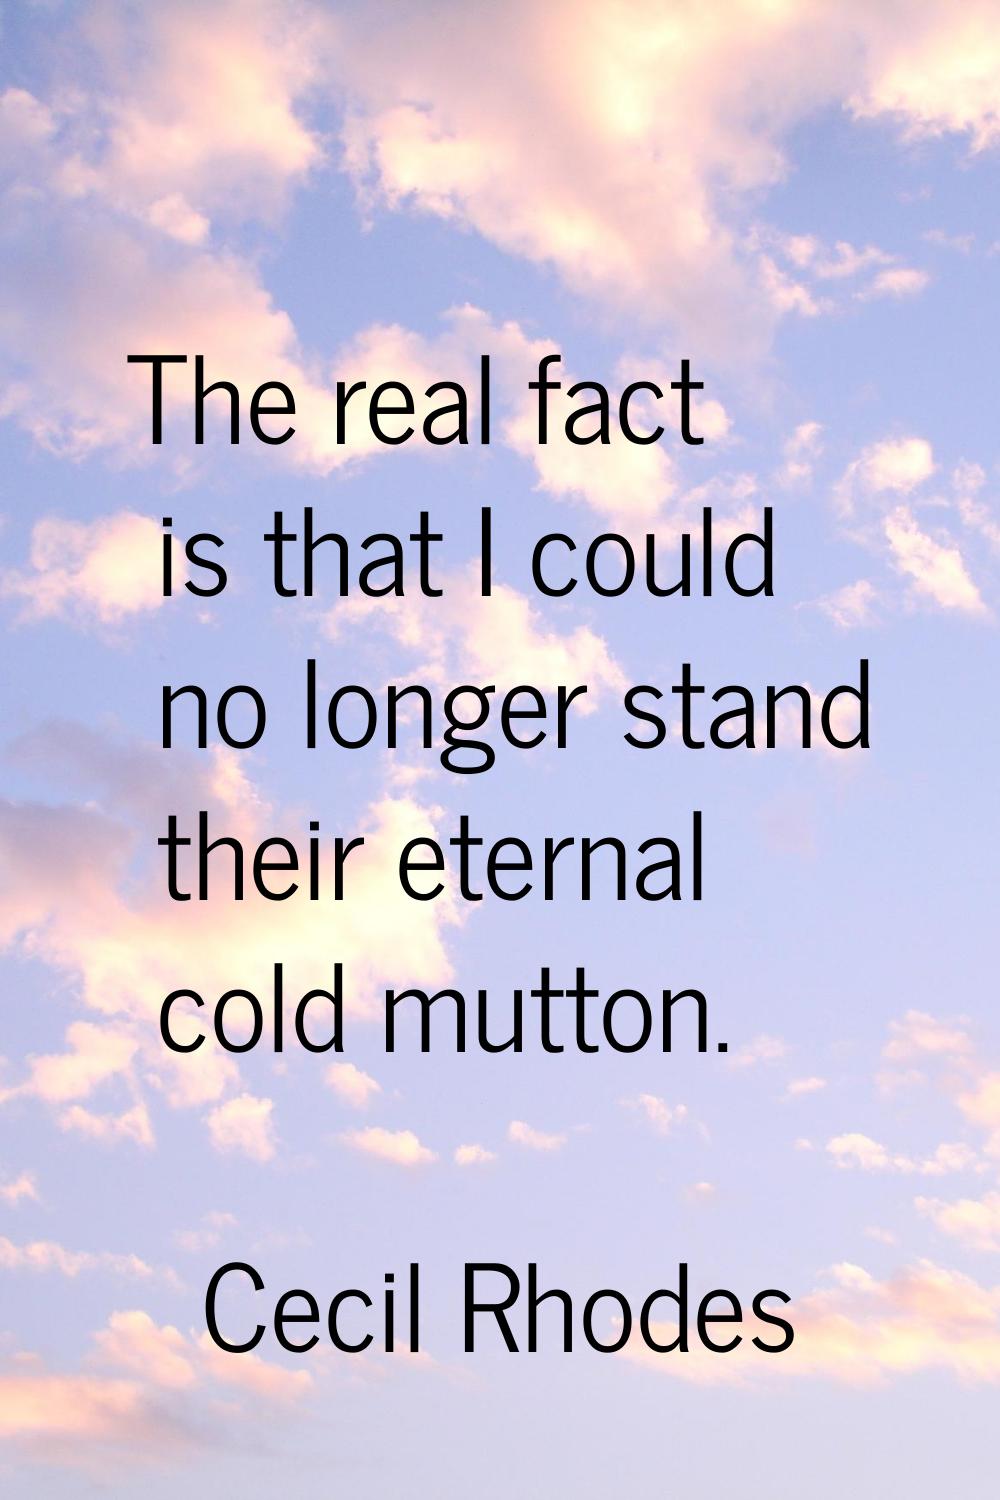 The real fact is that I could no longer stand their eternal cold mutton.